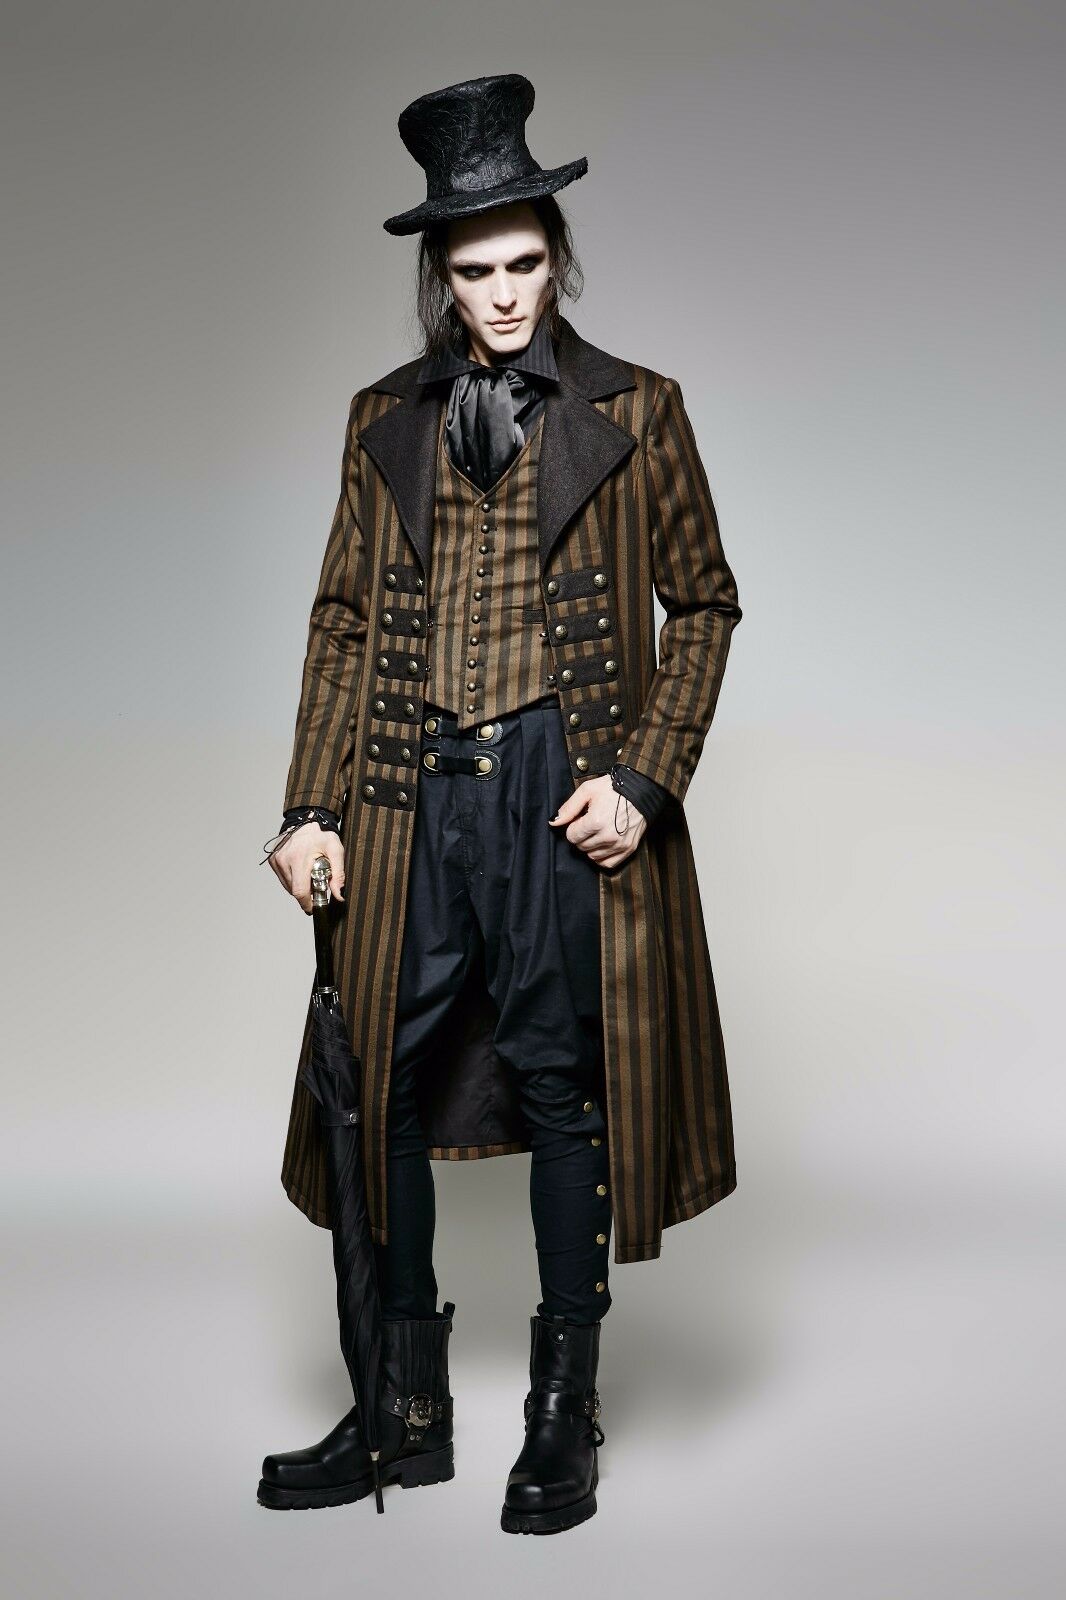 Steampunk Clothing & Fashion  Buy Online from Australia